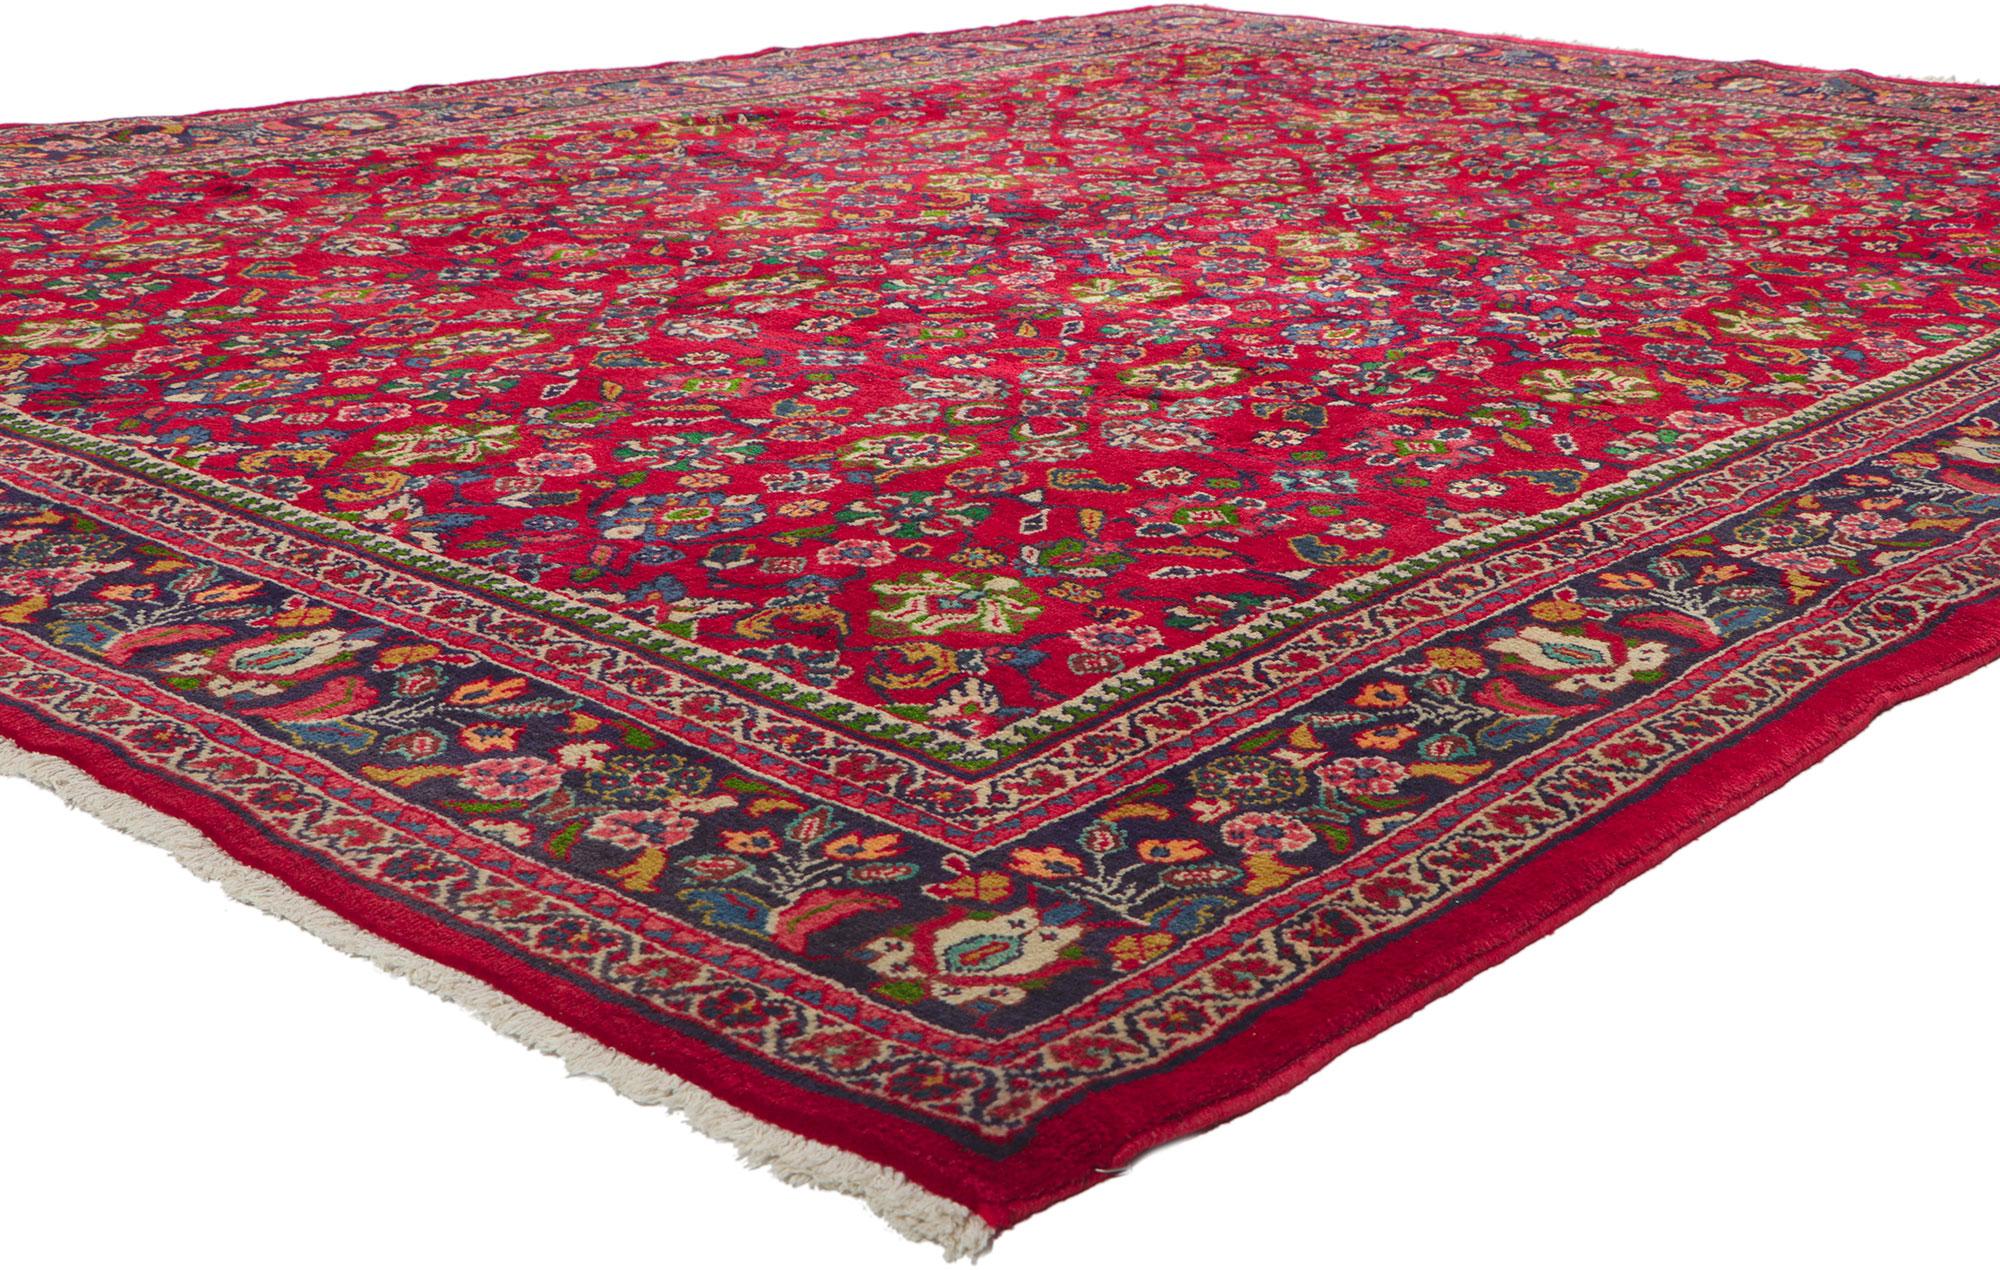 61095 Vintage Persian Mahal Rug, 08'07 x 11'07?
? With its beguiling ornamental elements, incredible detail and texture, this hand knotted wool vintage Persian Mahal rug is a captivating vision of woven beauty. The timeless botanical design and